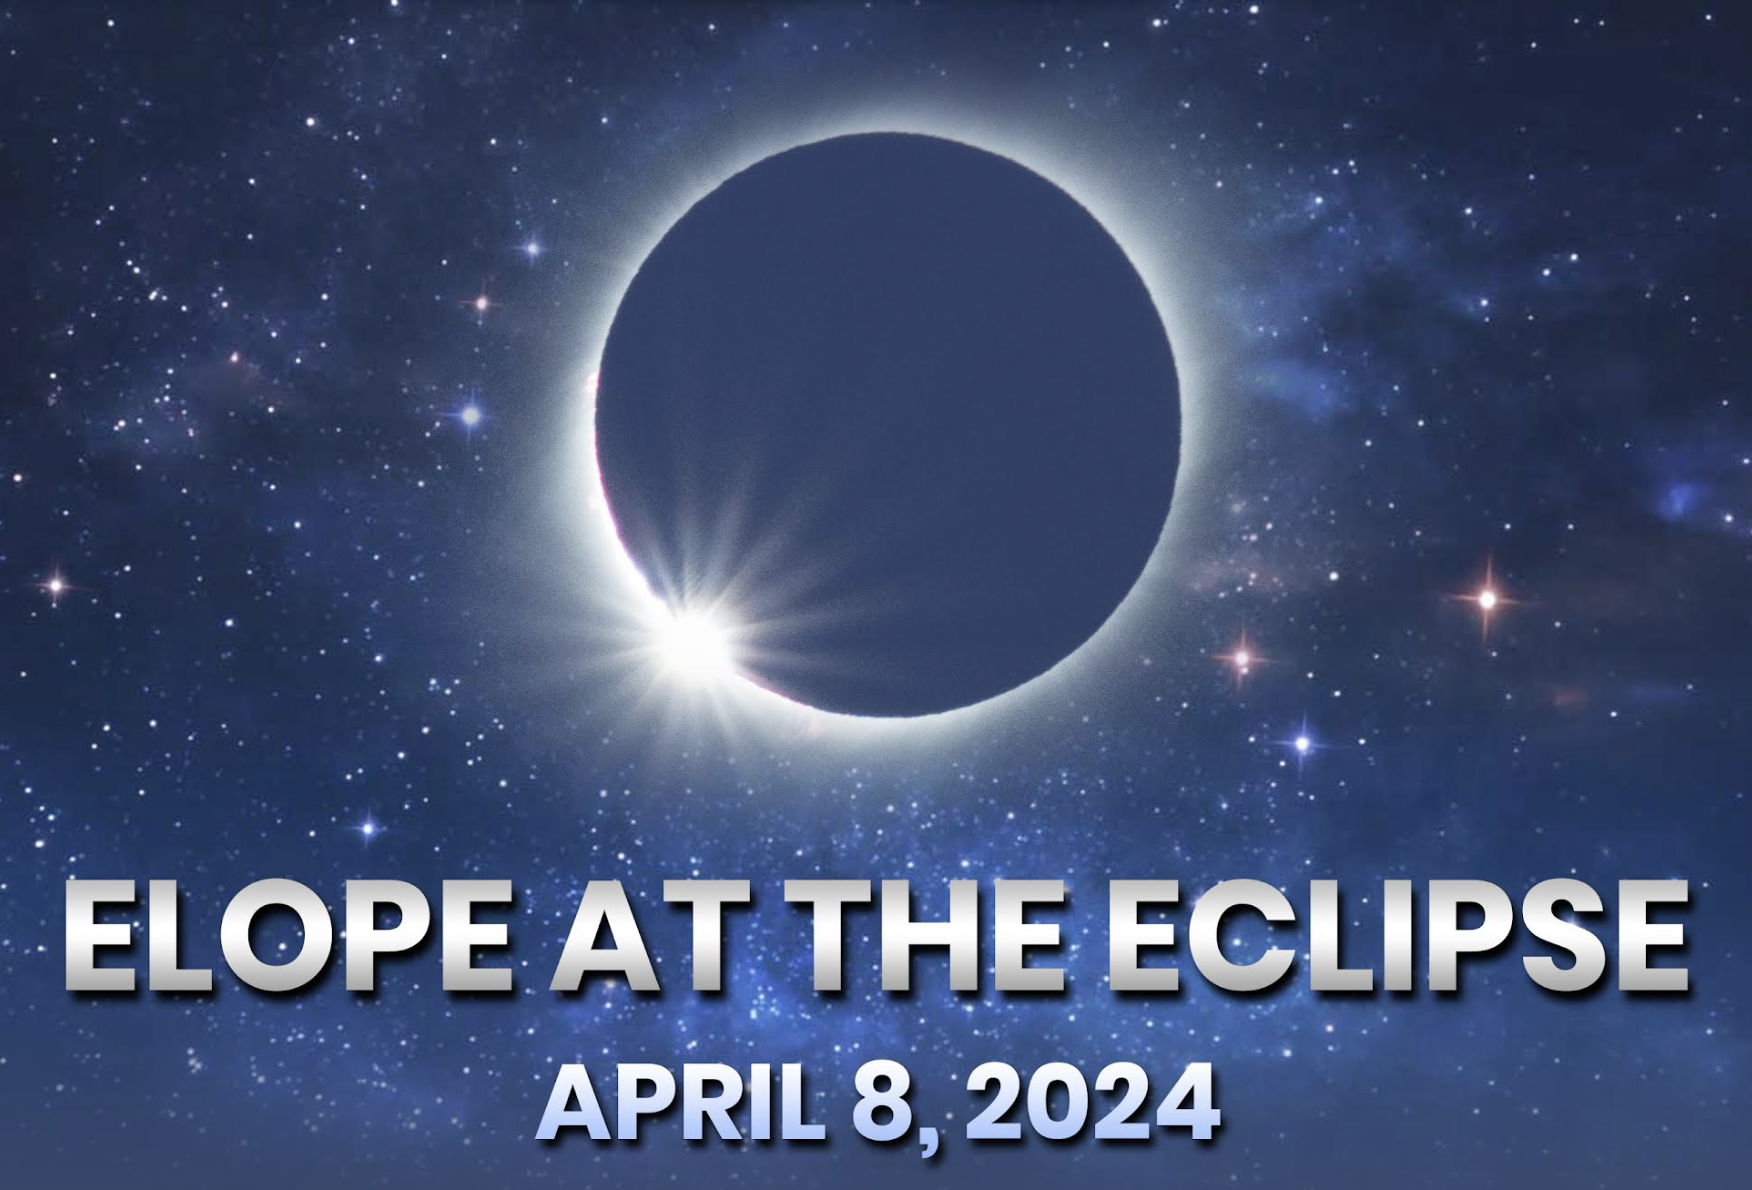 Elope at the Eclipse